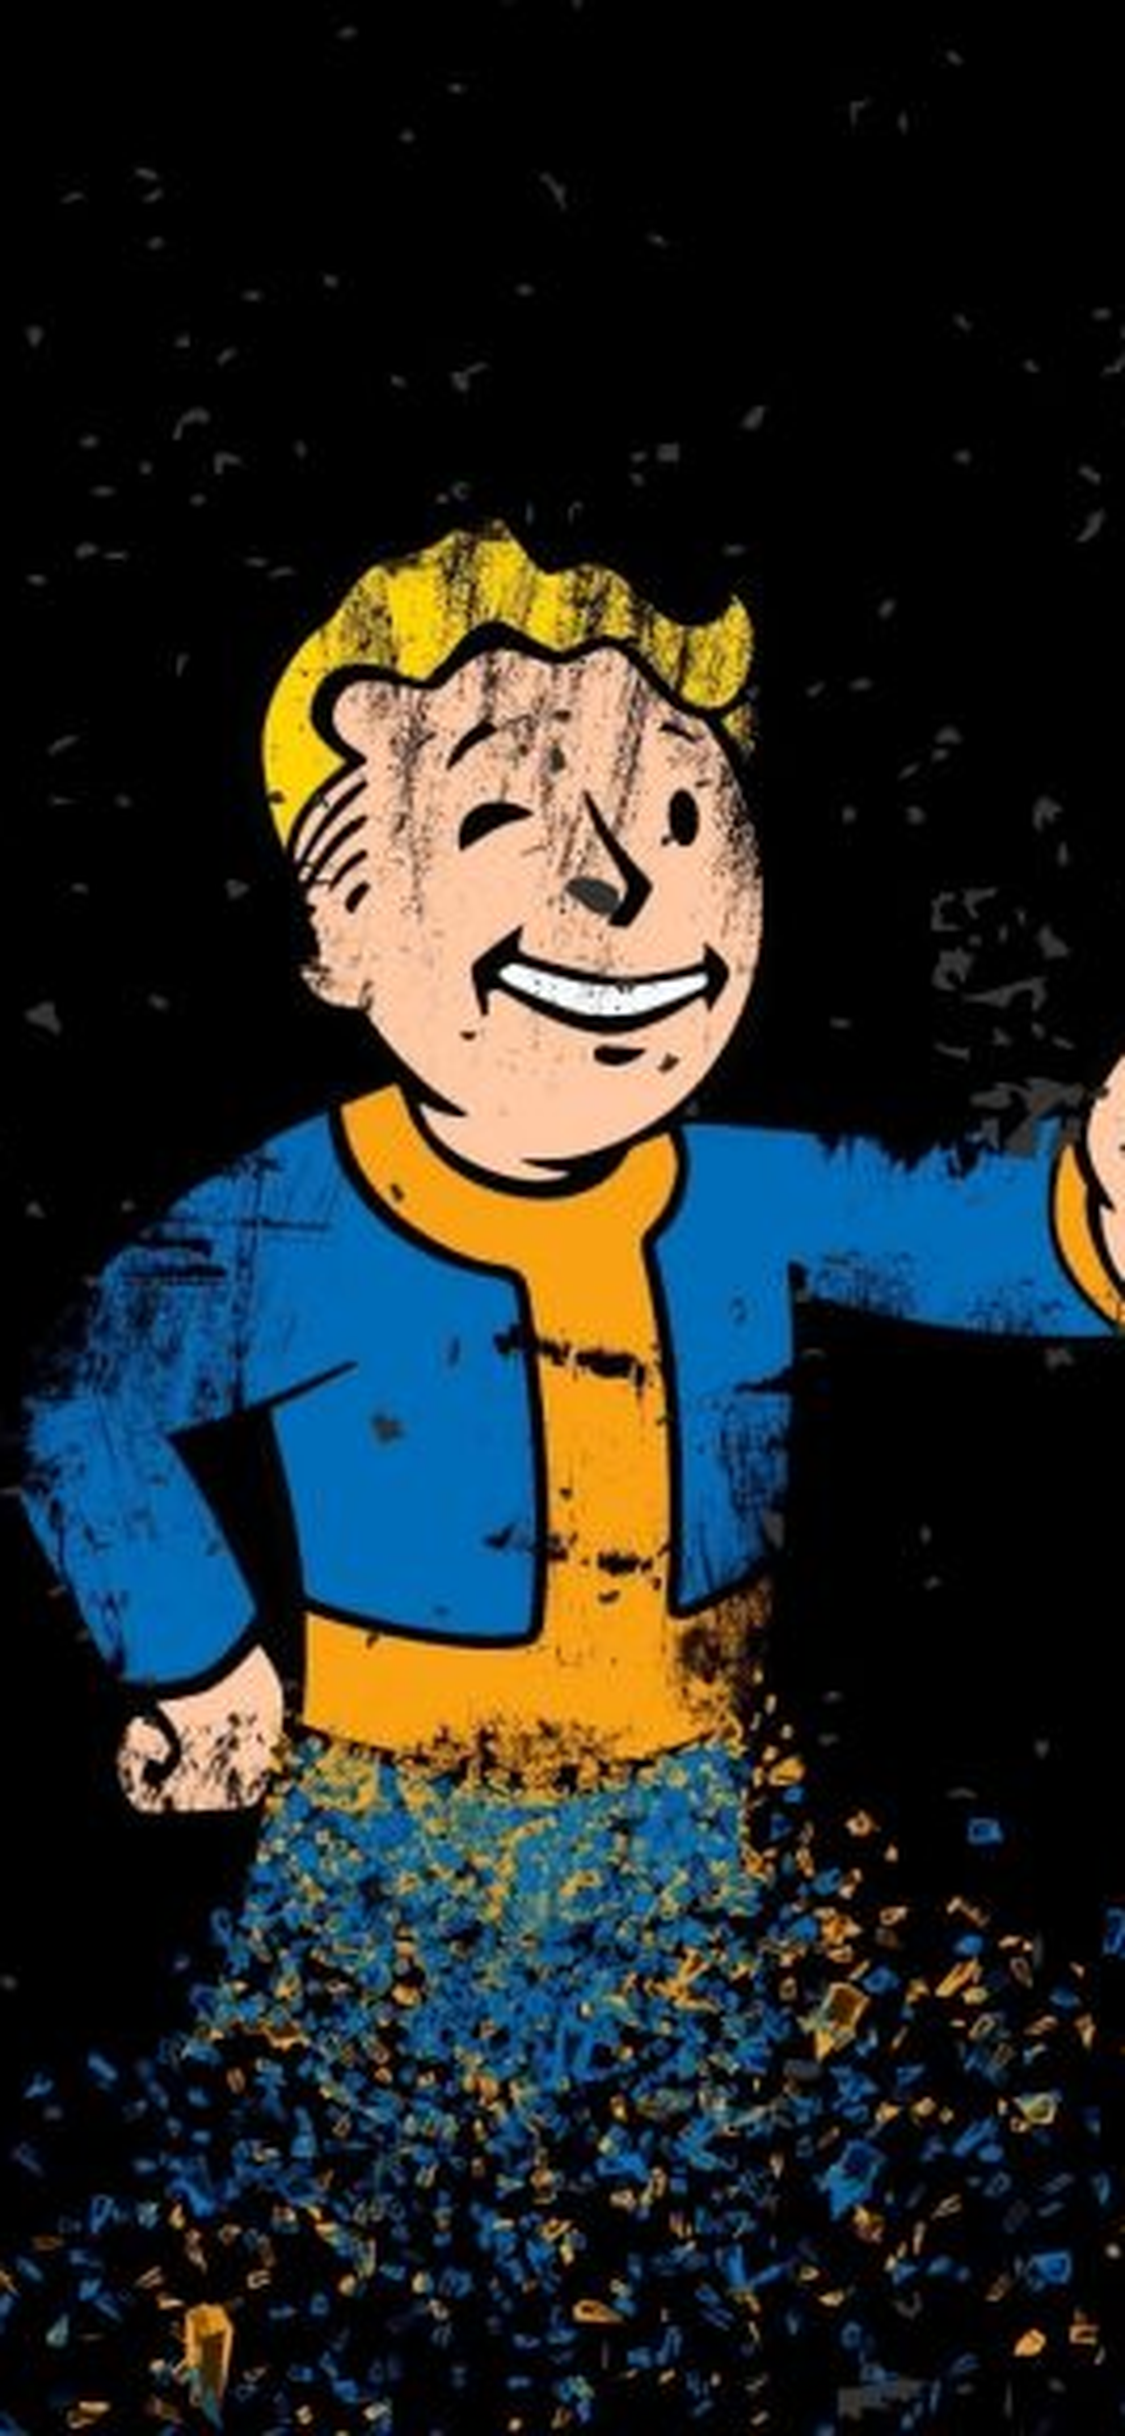 Download Fallout 4 Vault Boy For iPhone X Wallpaper Wallpaper 21 9 Wallpaper & Background Download